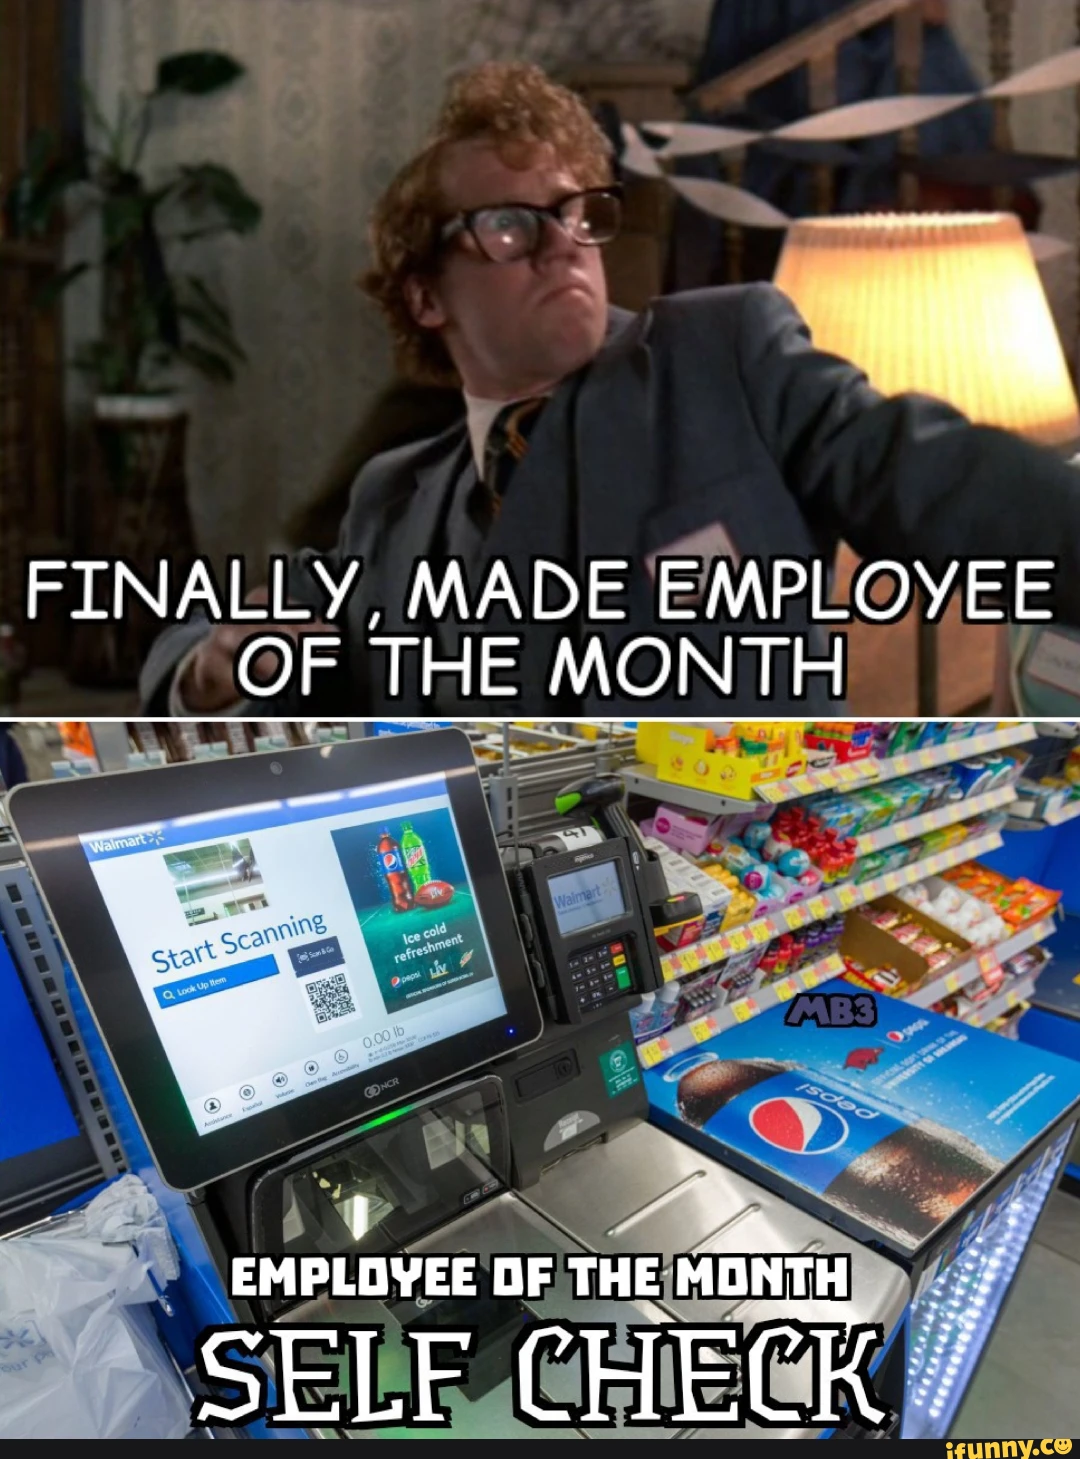 FINALLY, MADE EMPLOYEE OF THE MONTH EMPLOYEE OF THE SELF CHECK